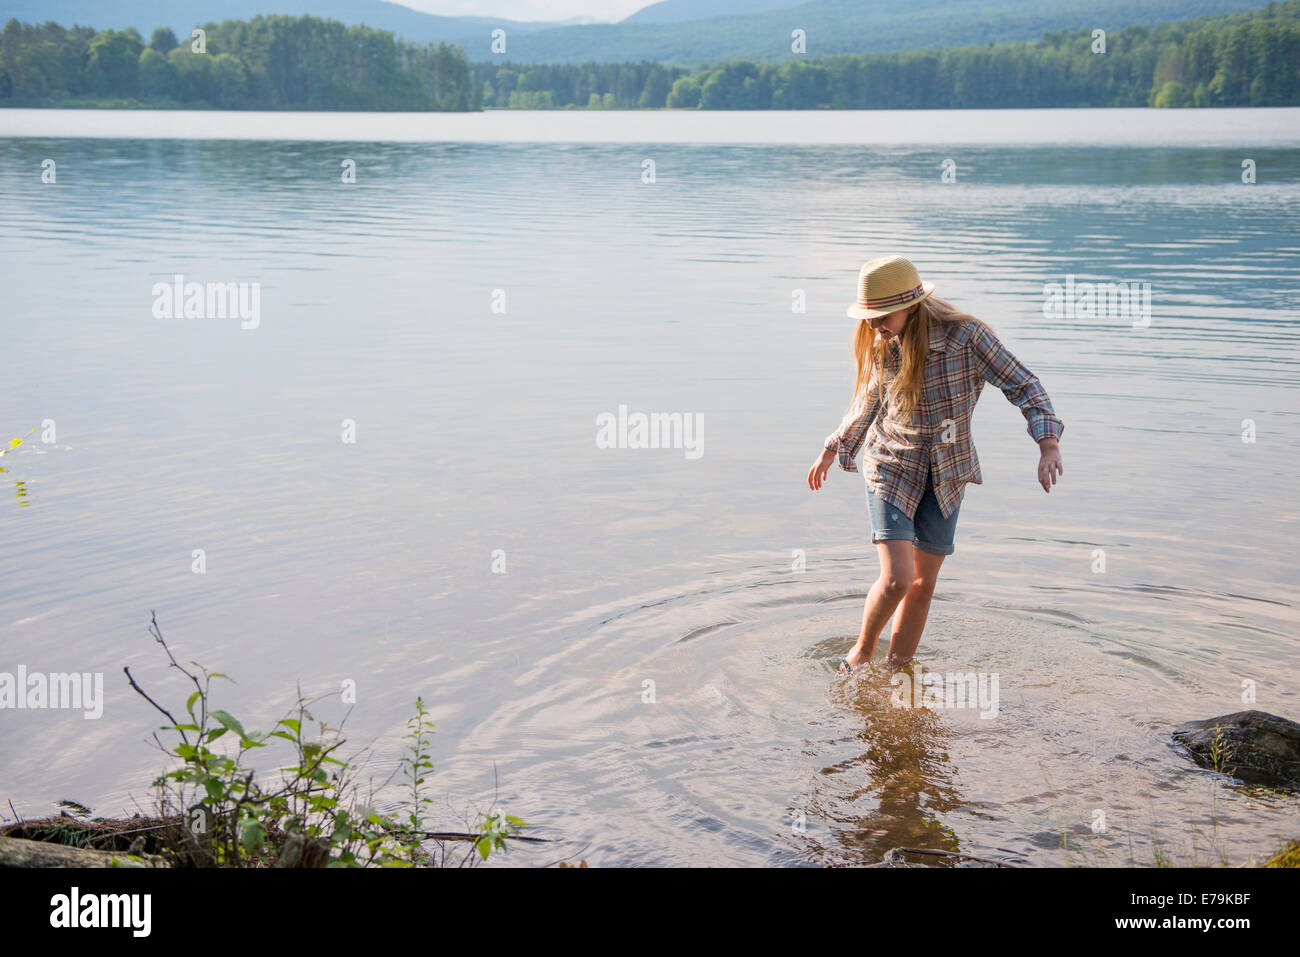 A young girl in a straw hat and shorts paddling in the shallow waters of a lake. Stock Photo